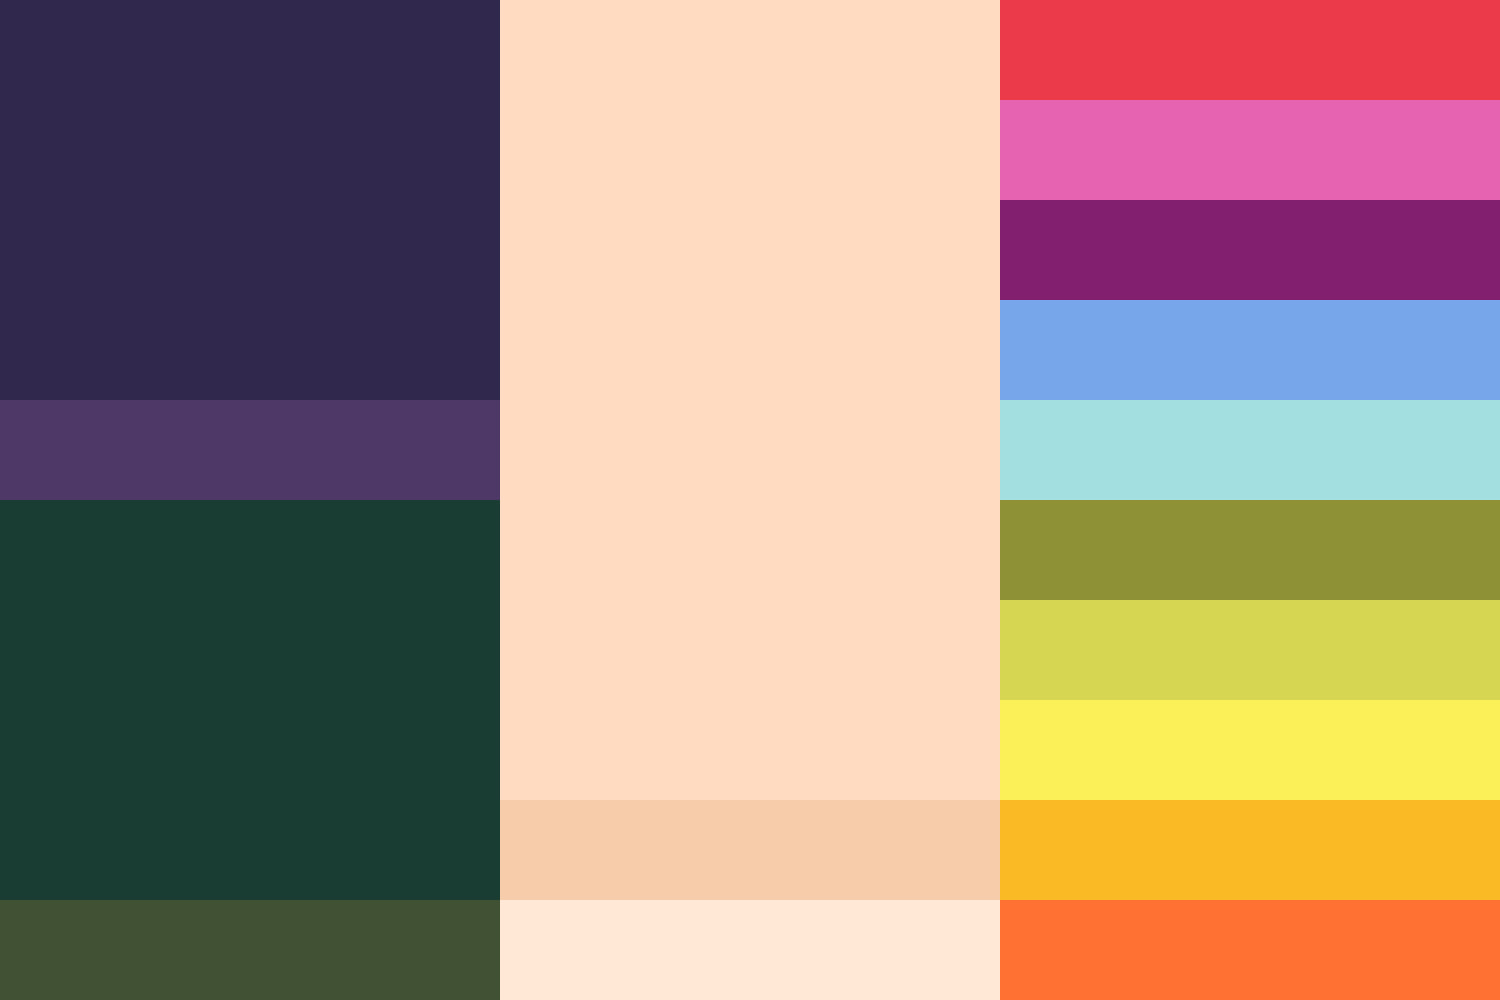 Color palette of dark green and purple colors contrasted by soft nude colors and several vibrant colors to add pop